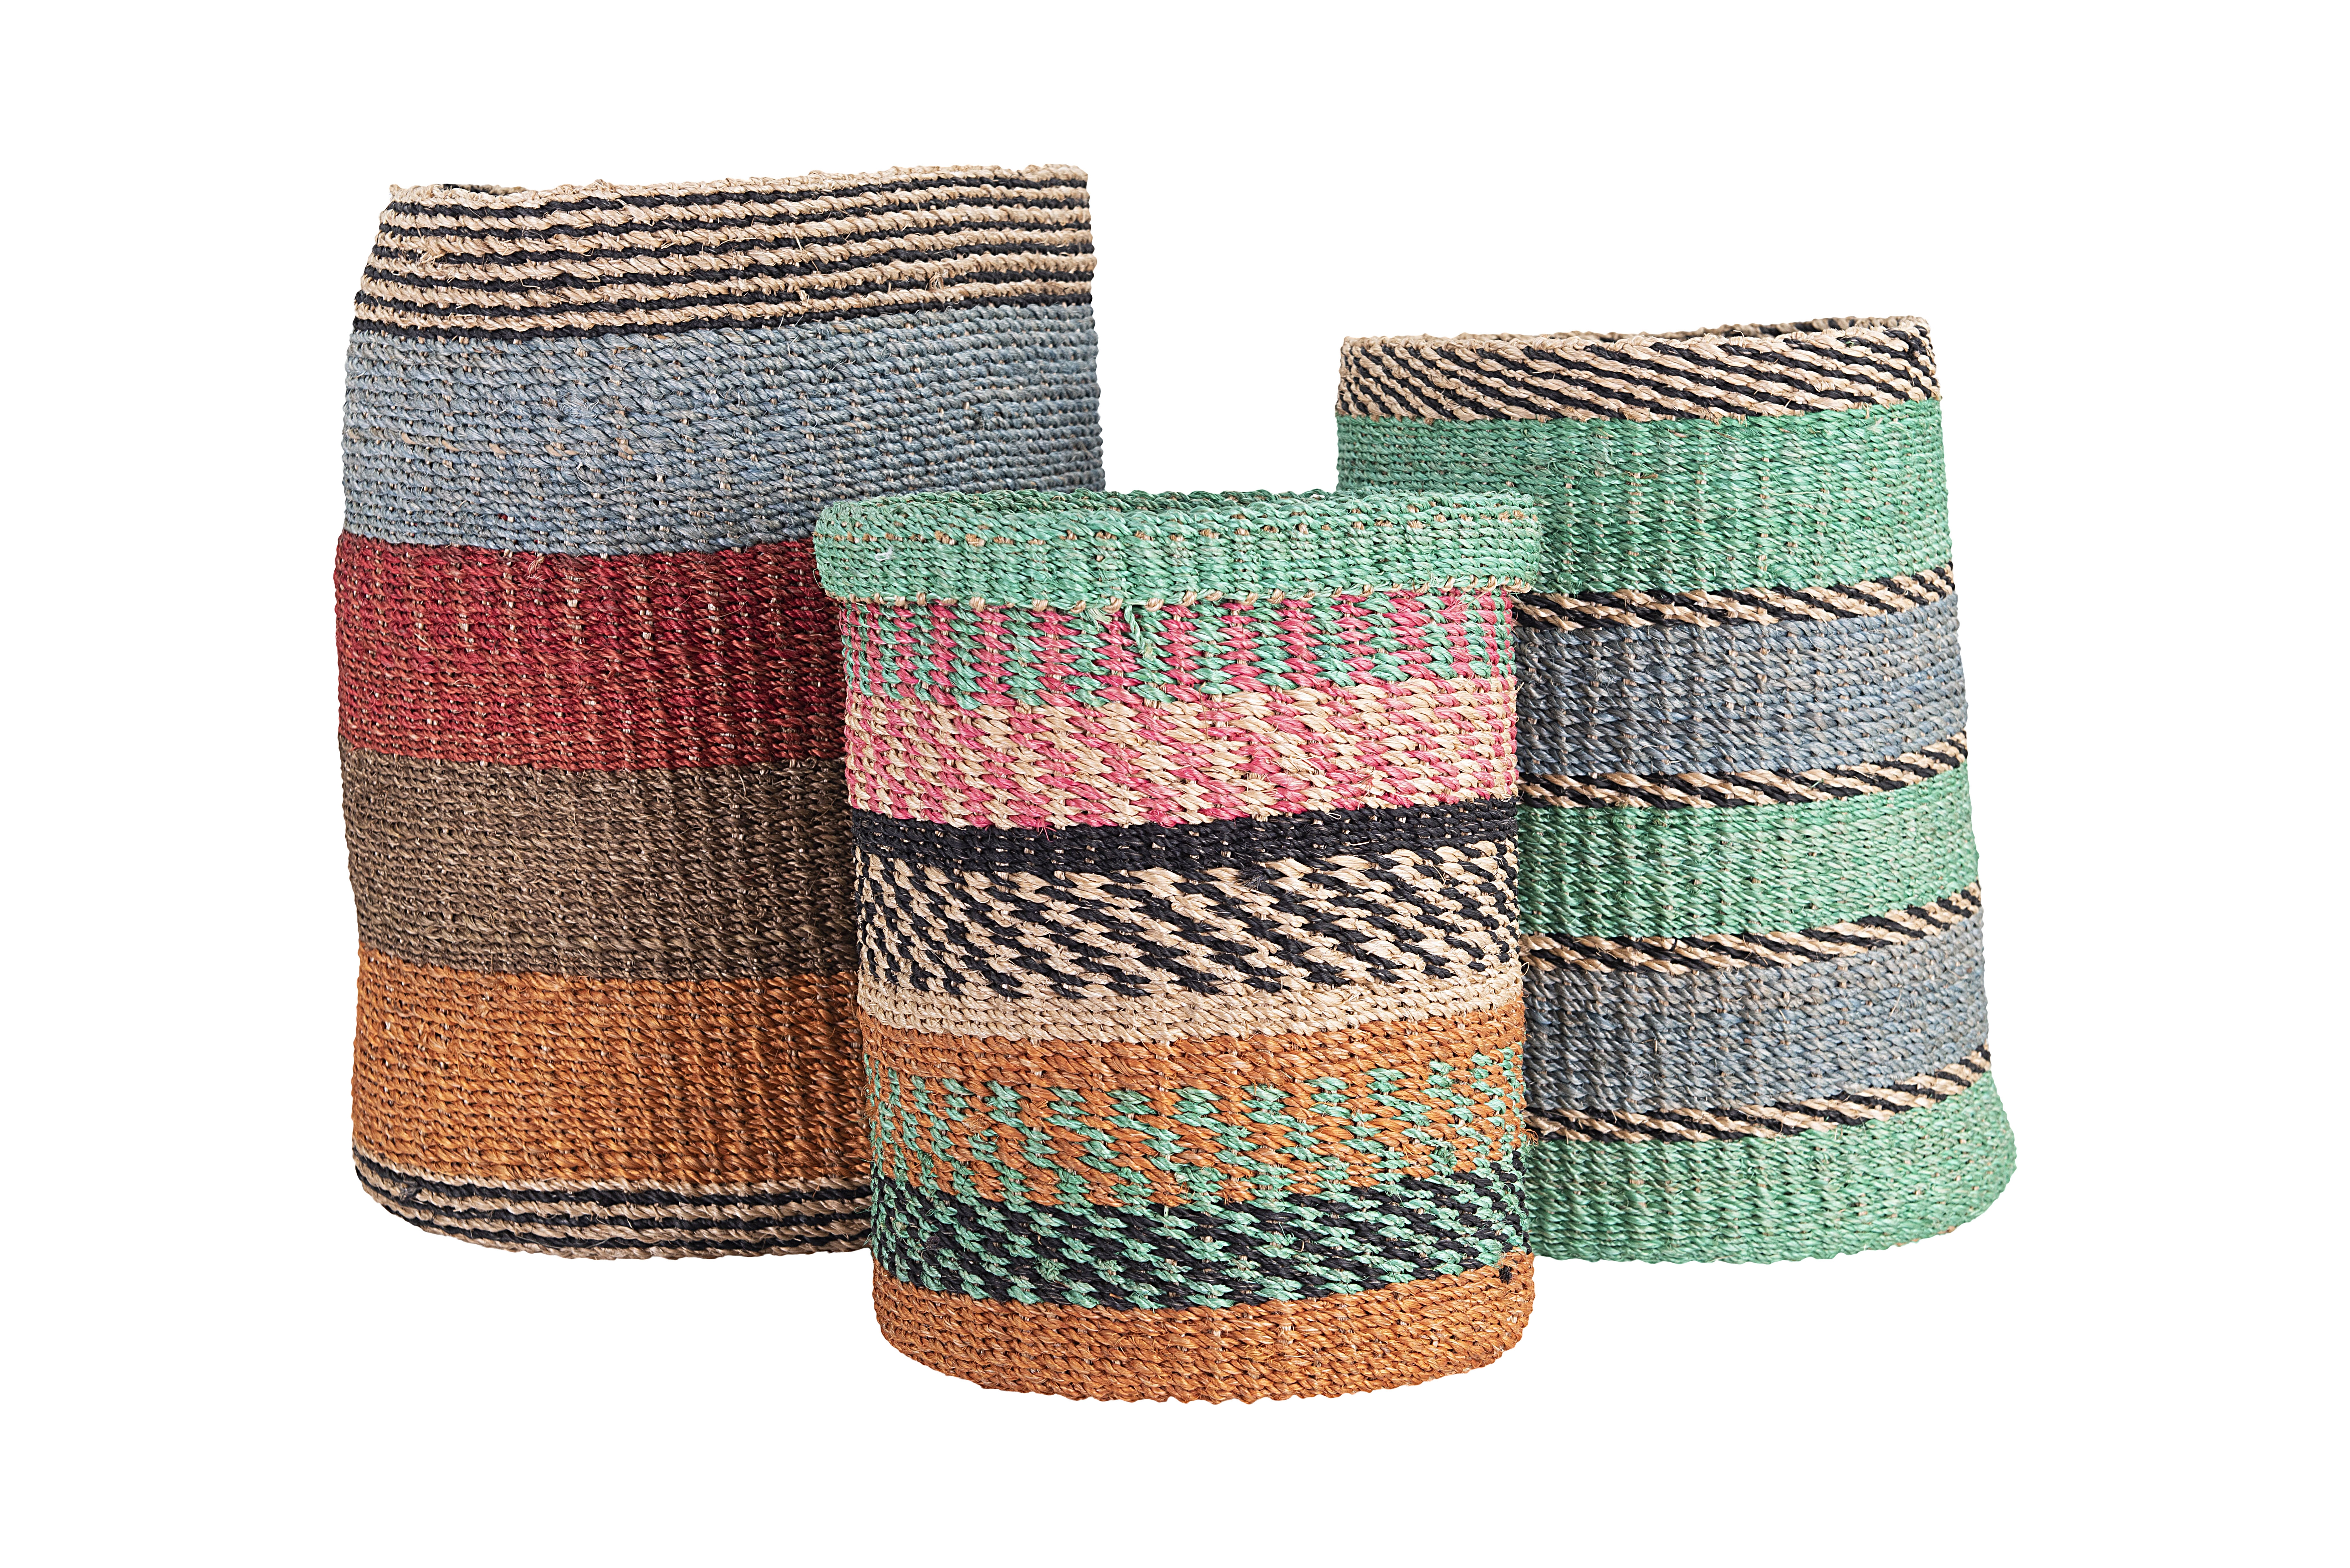 Bright Stripes Hand Woven Abaca Baskets, Set of 3 - Image 0